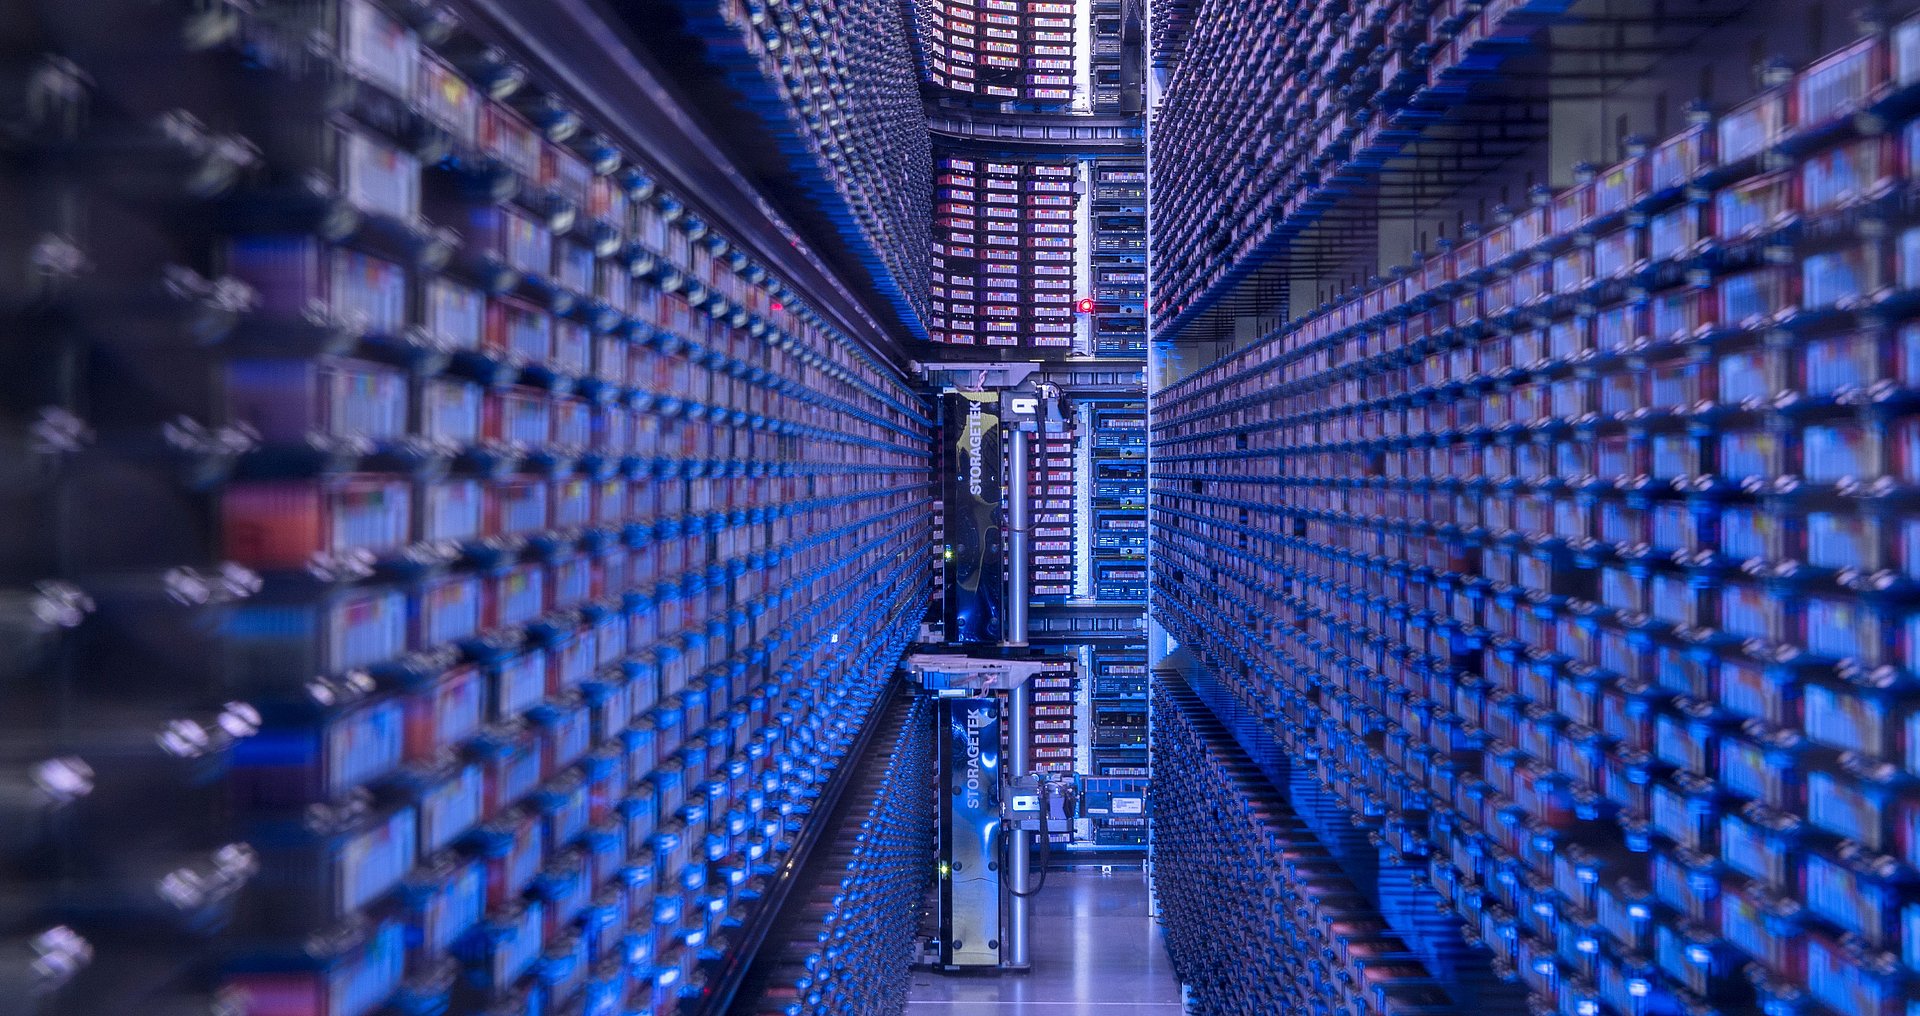 Image of the interior of the Leibniz Supercomputing Centre of the Bavarian Academy of Sciences and Humanities